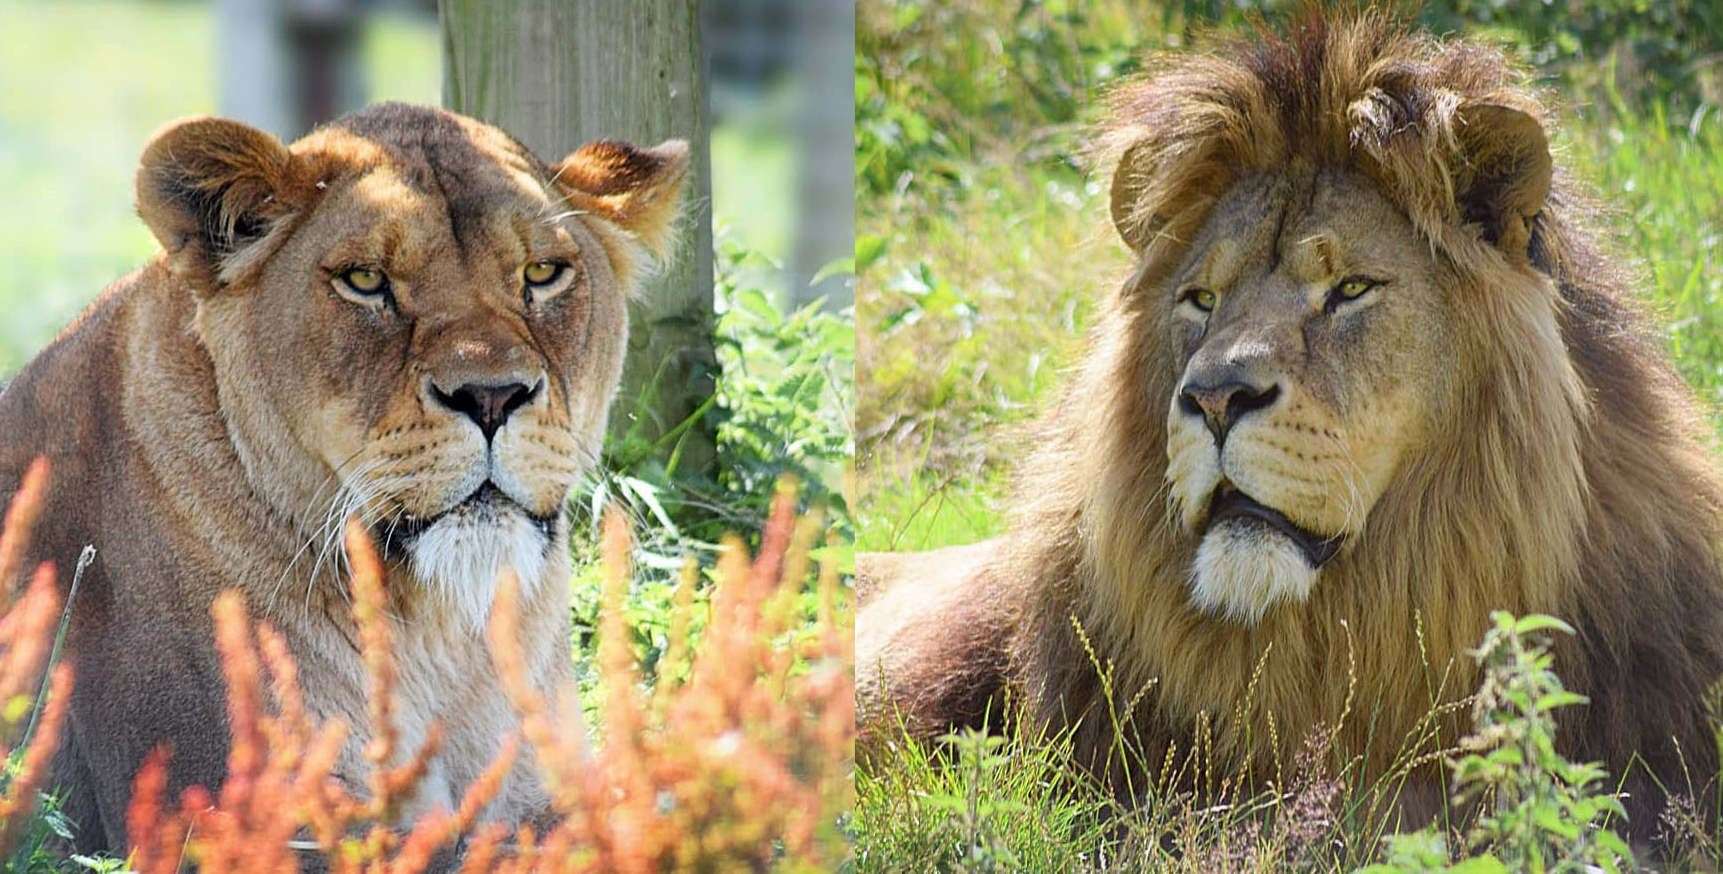 Port Lympne is home to hundreds of animals, including the lions Wilma and Zulu Picture: Port Lympne